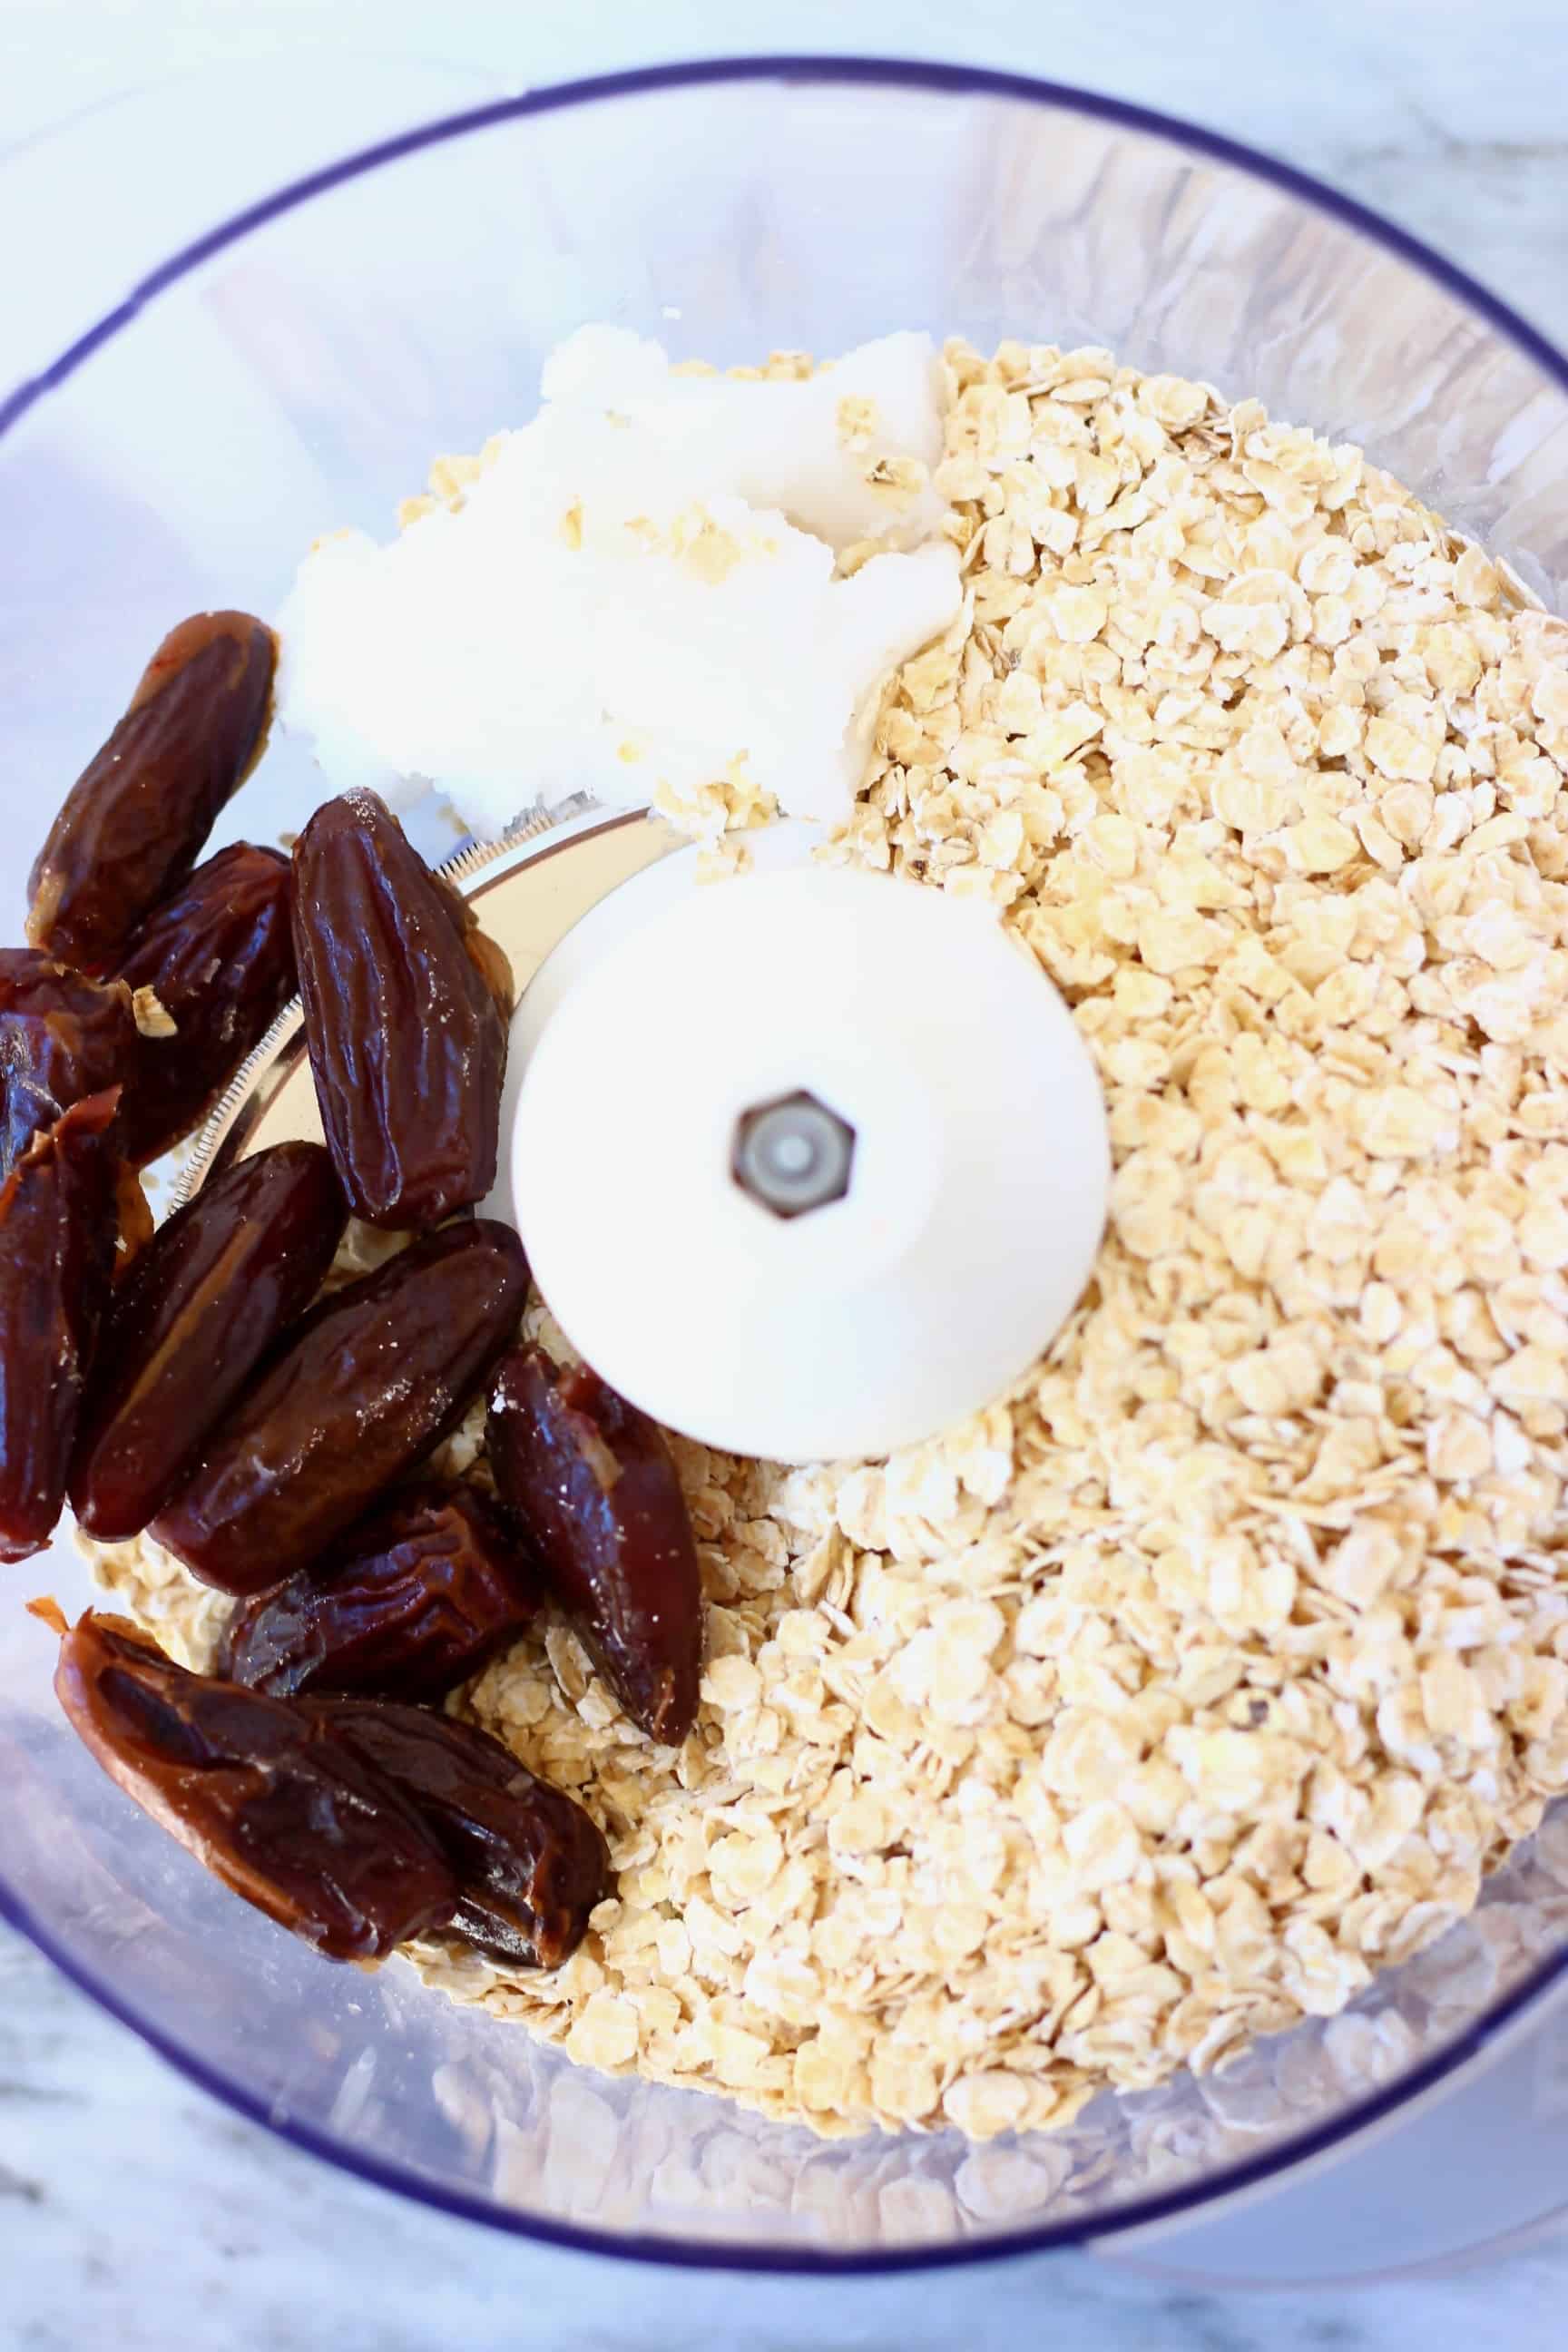 Oats, dates and coconut oil in a food processor